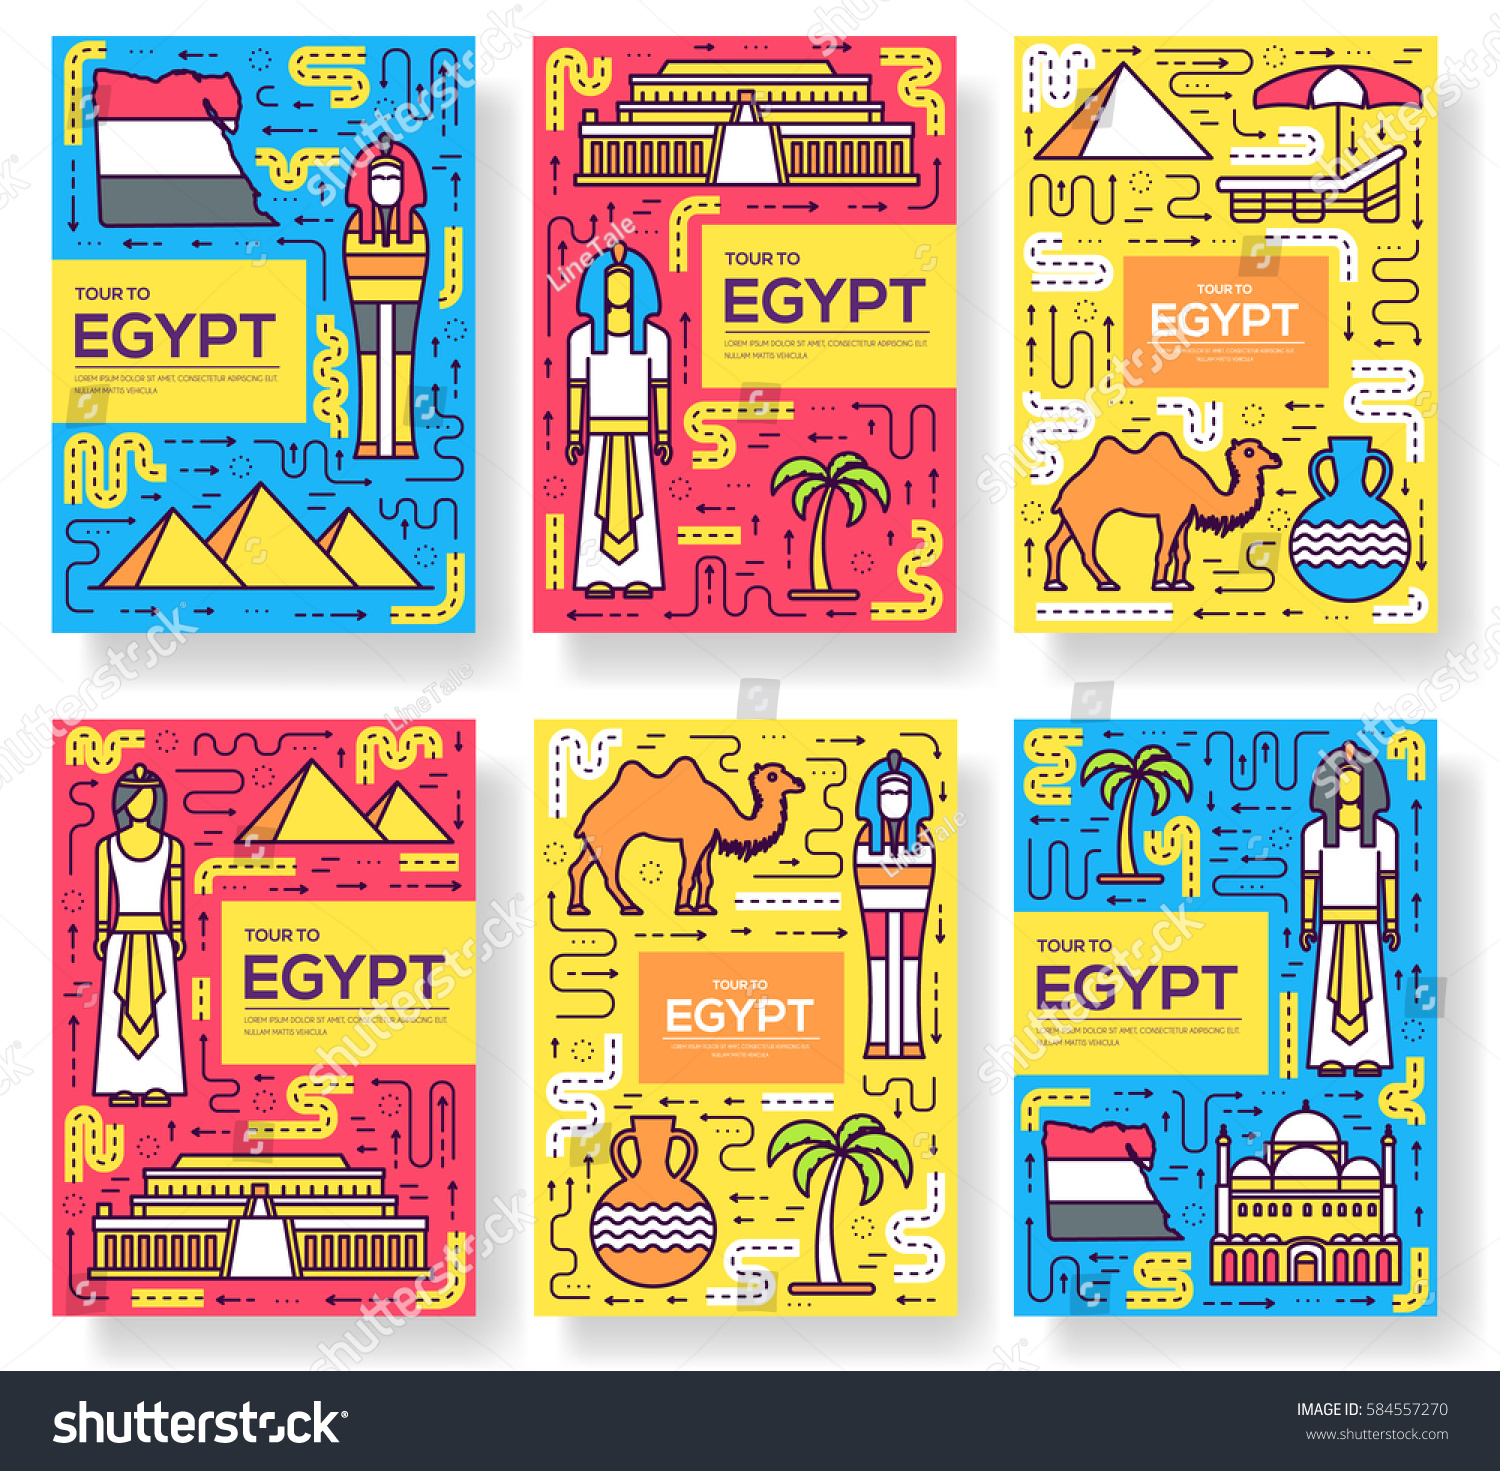 Country Egypt Travel Vacation Guidevector Brochure Stock ...